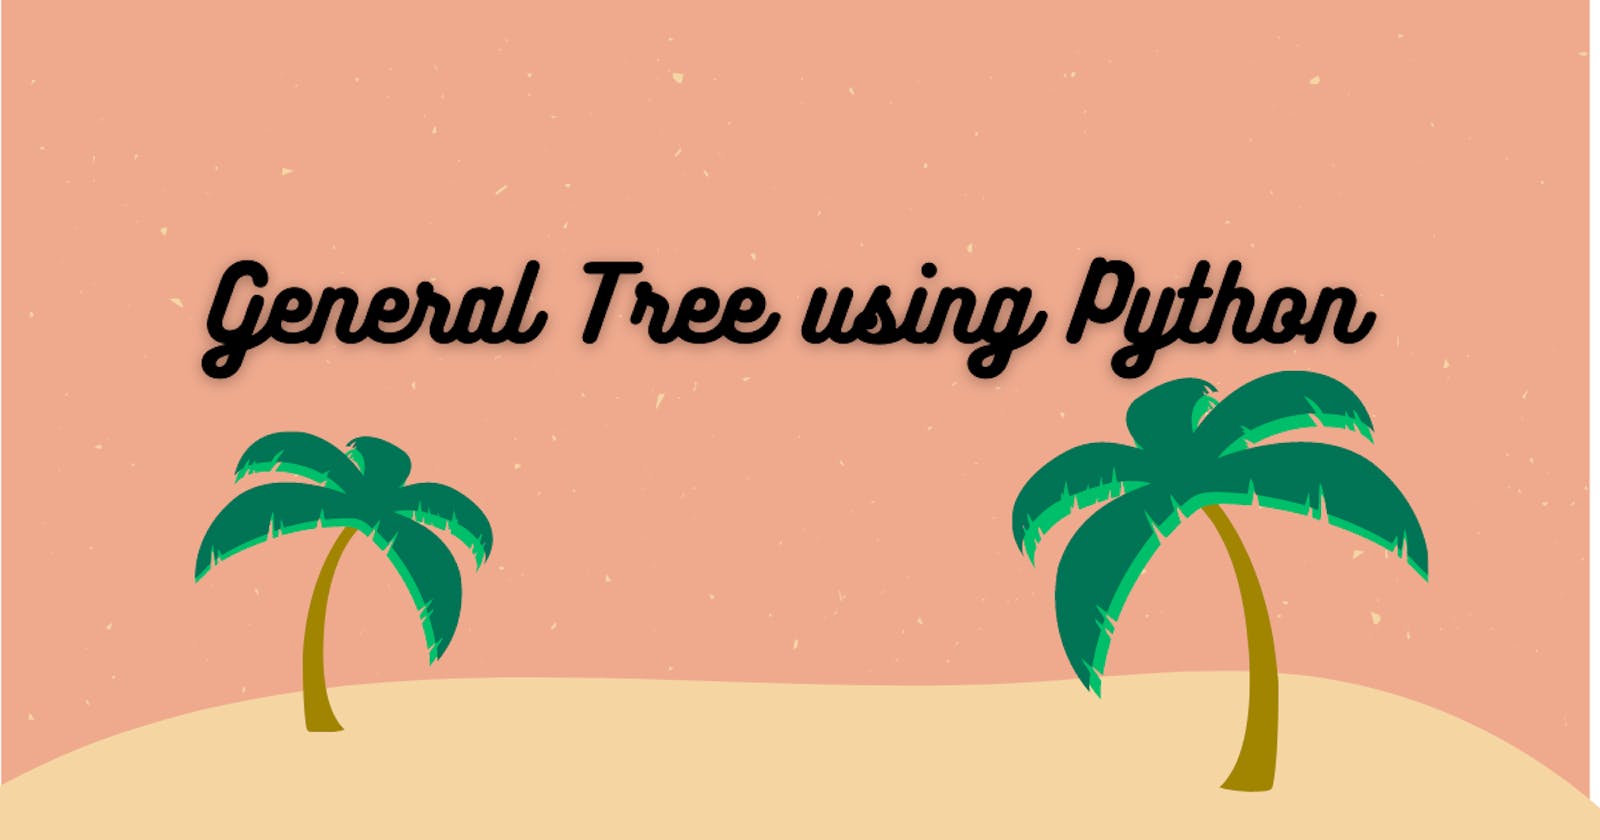 Implementing General Tree using Python